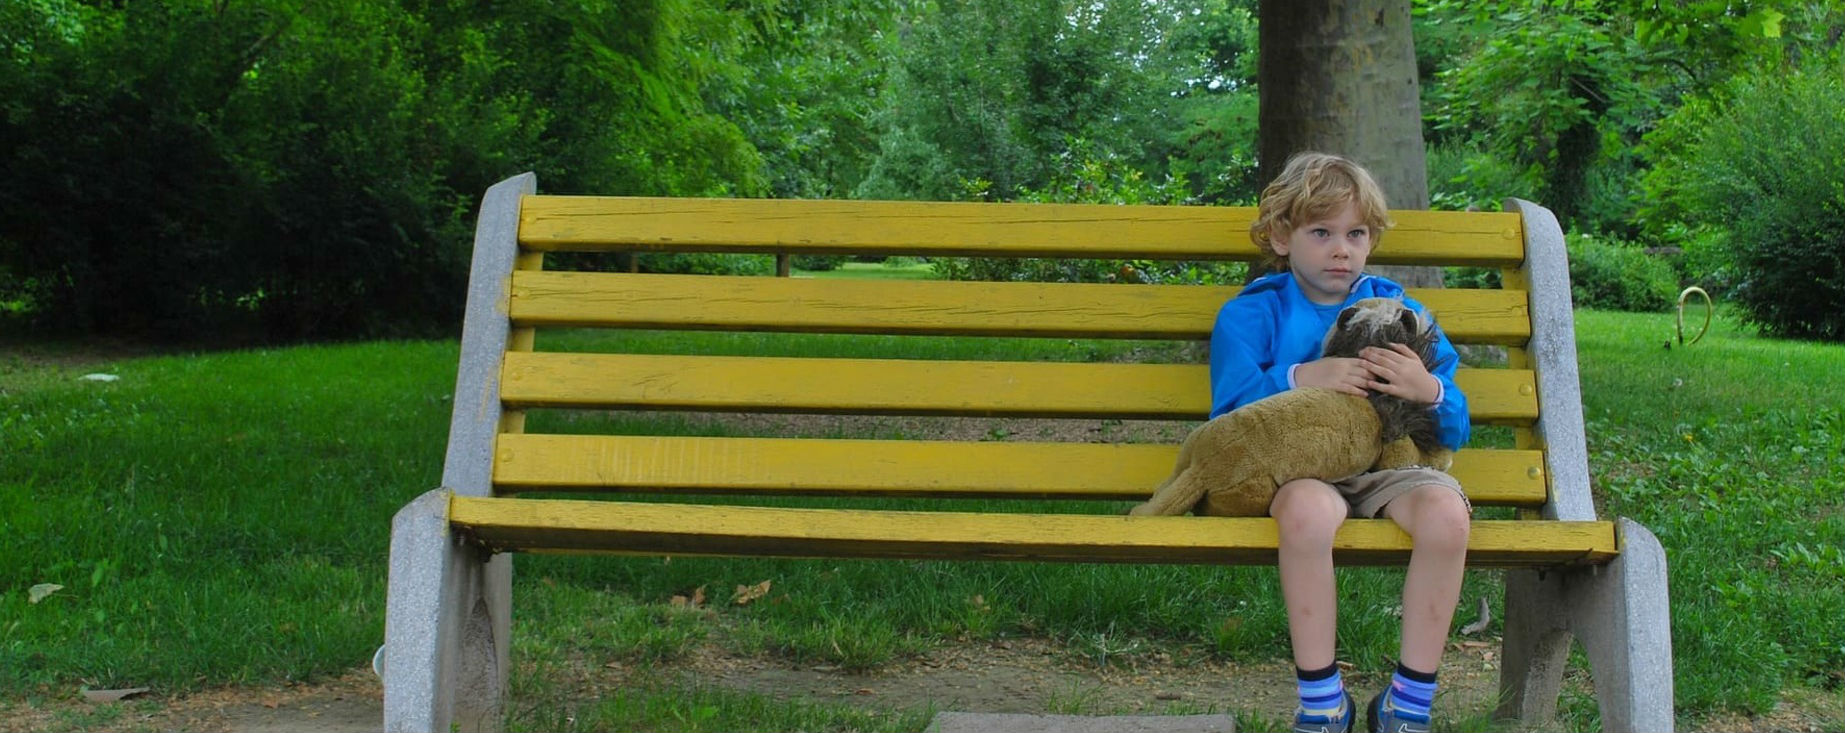 Lonely looking child on a park bench